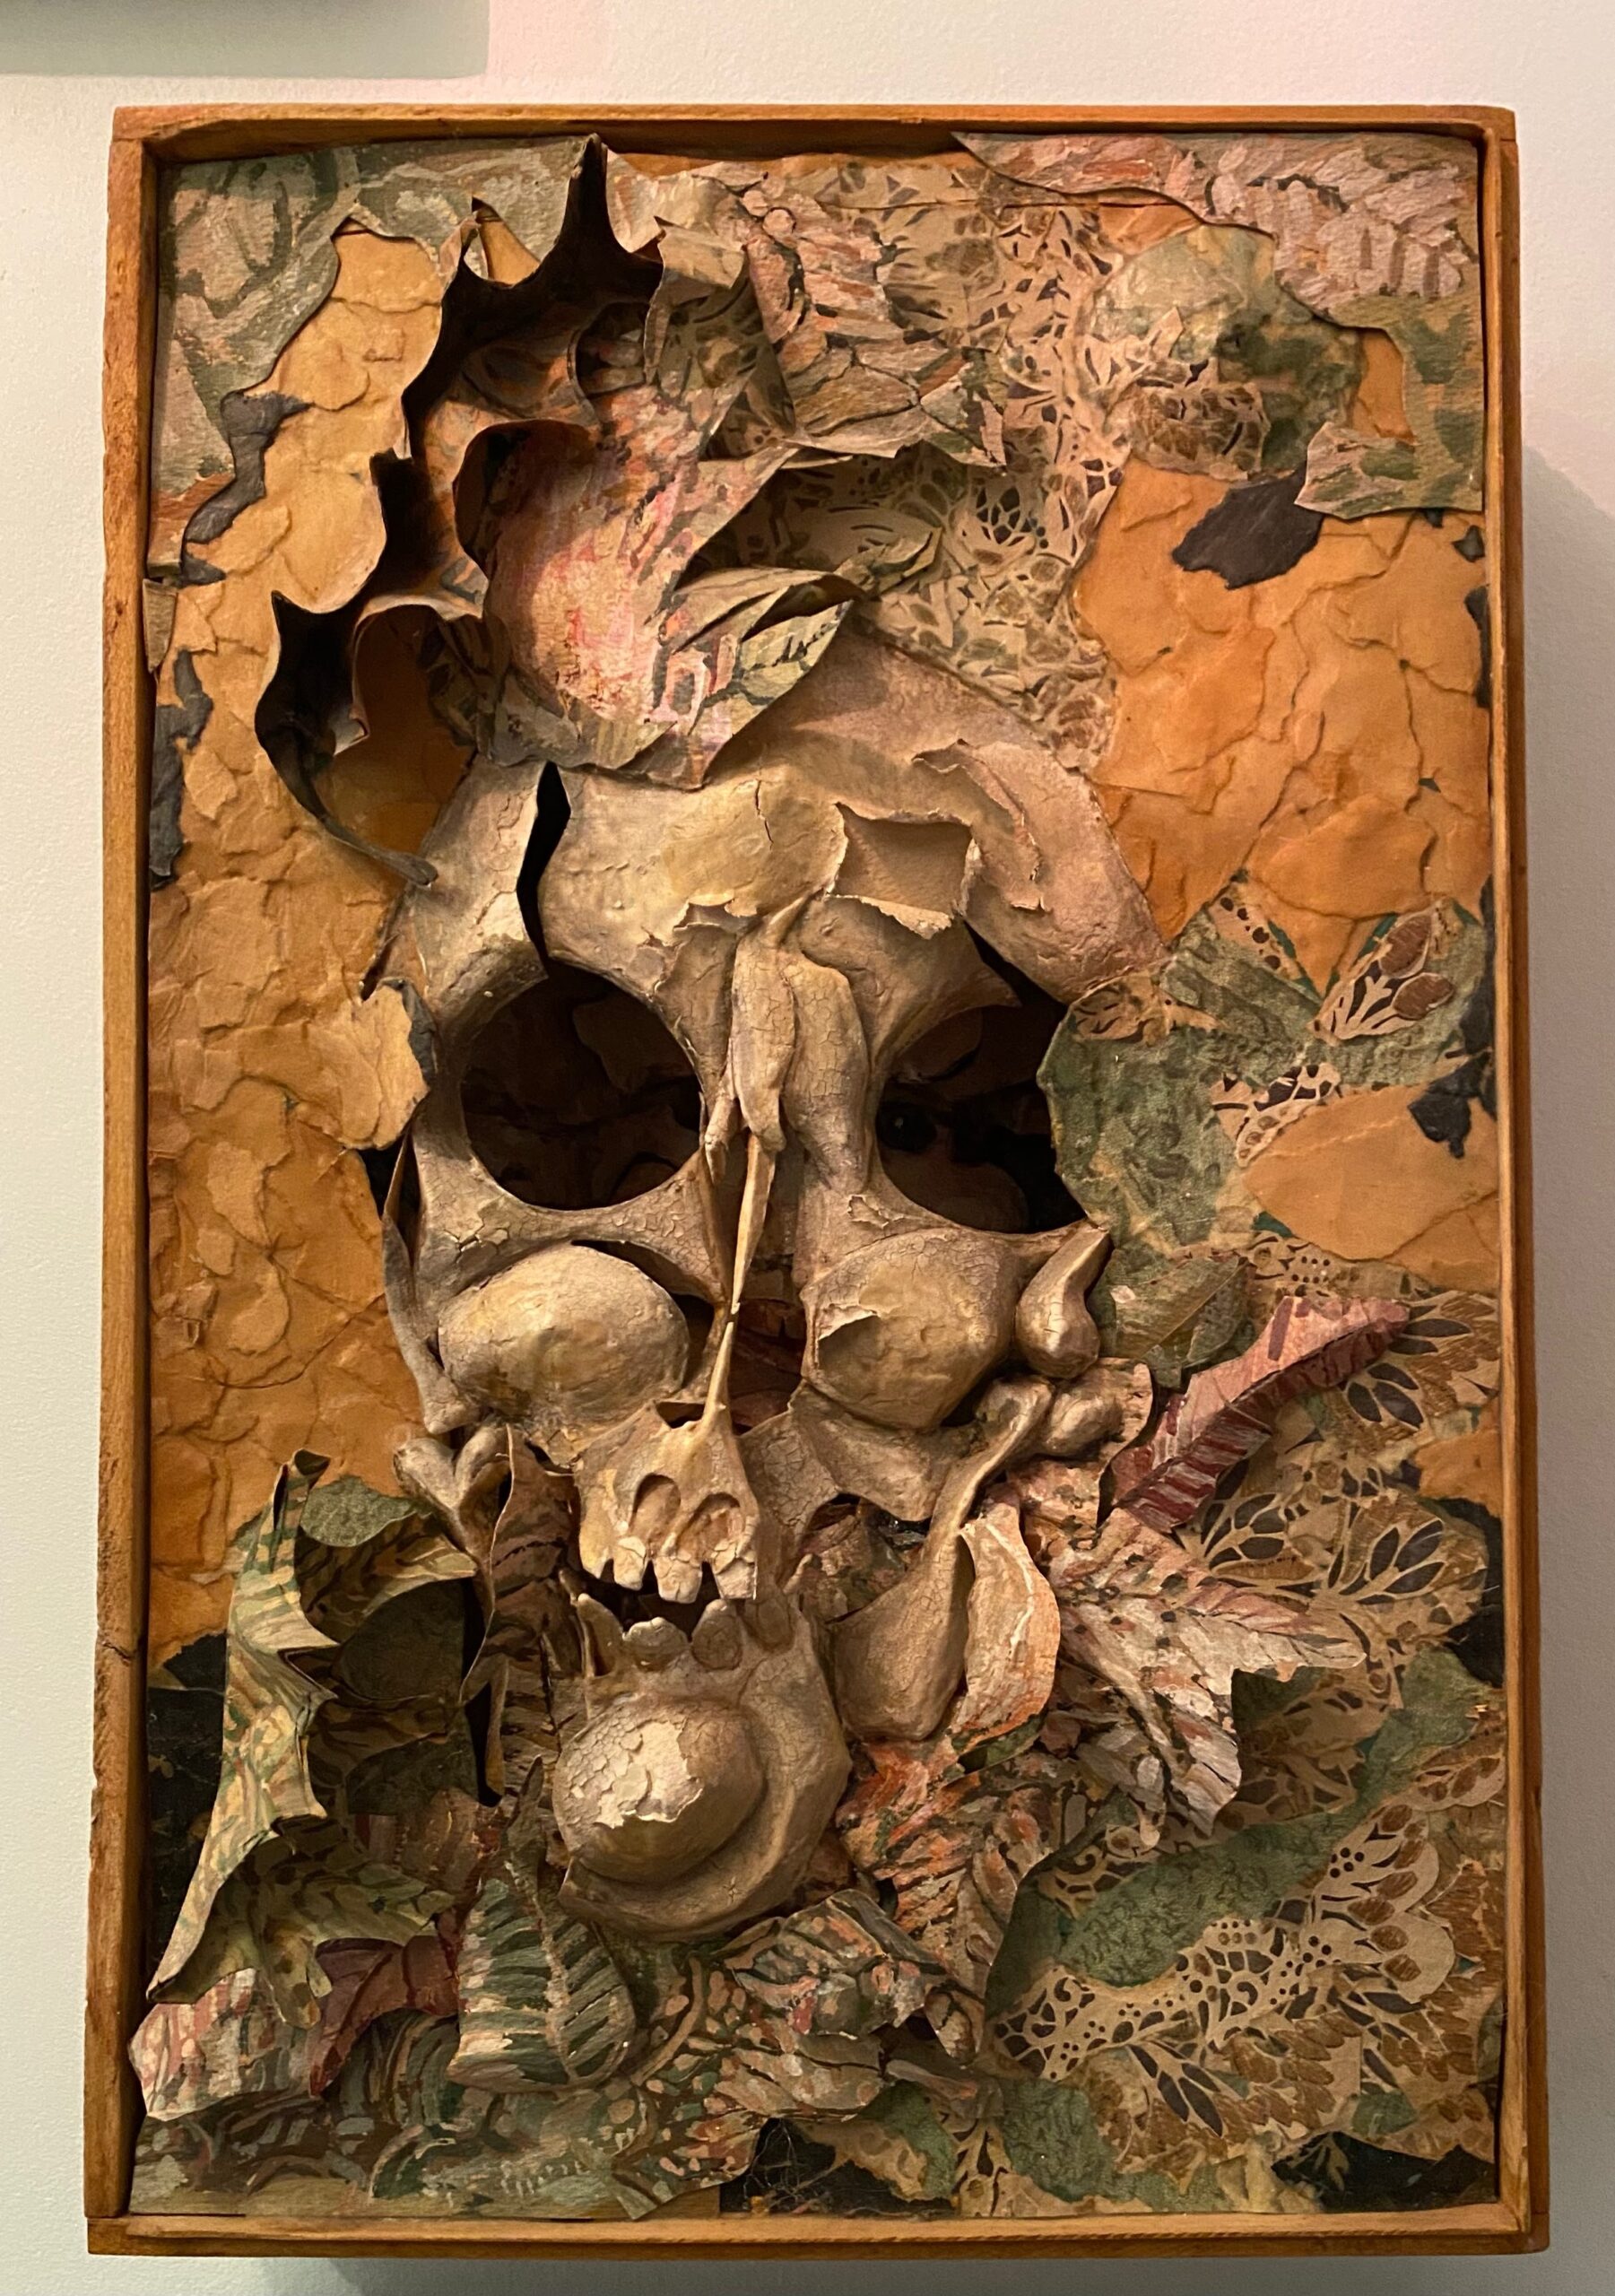 A paper sculpture of a skull surrounded by paper leaves and set inside a wooden box.